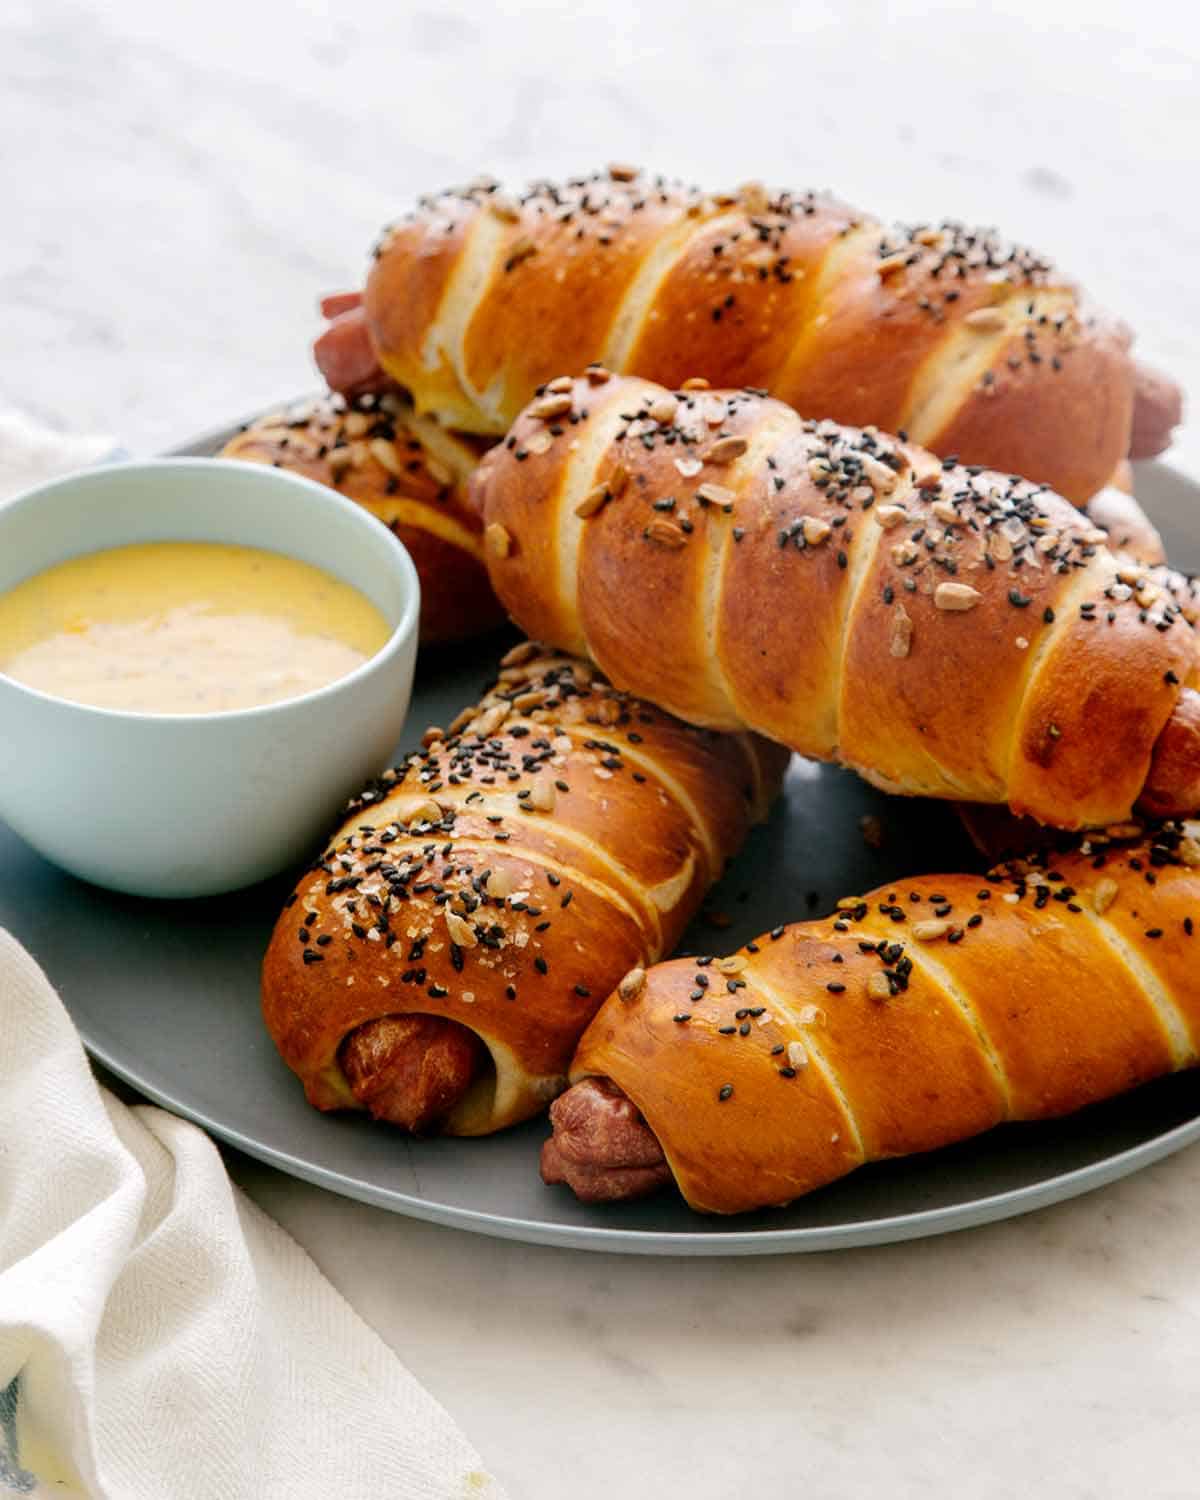 Pretzel dogs with a side of cheese sauce on a blue plate.